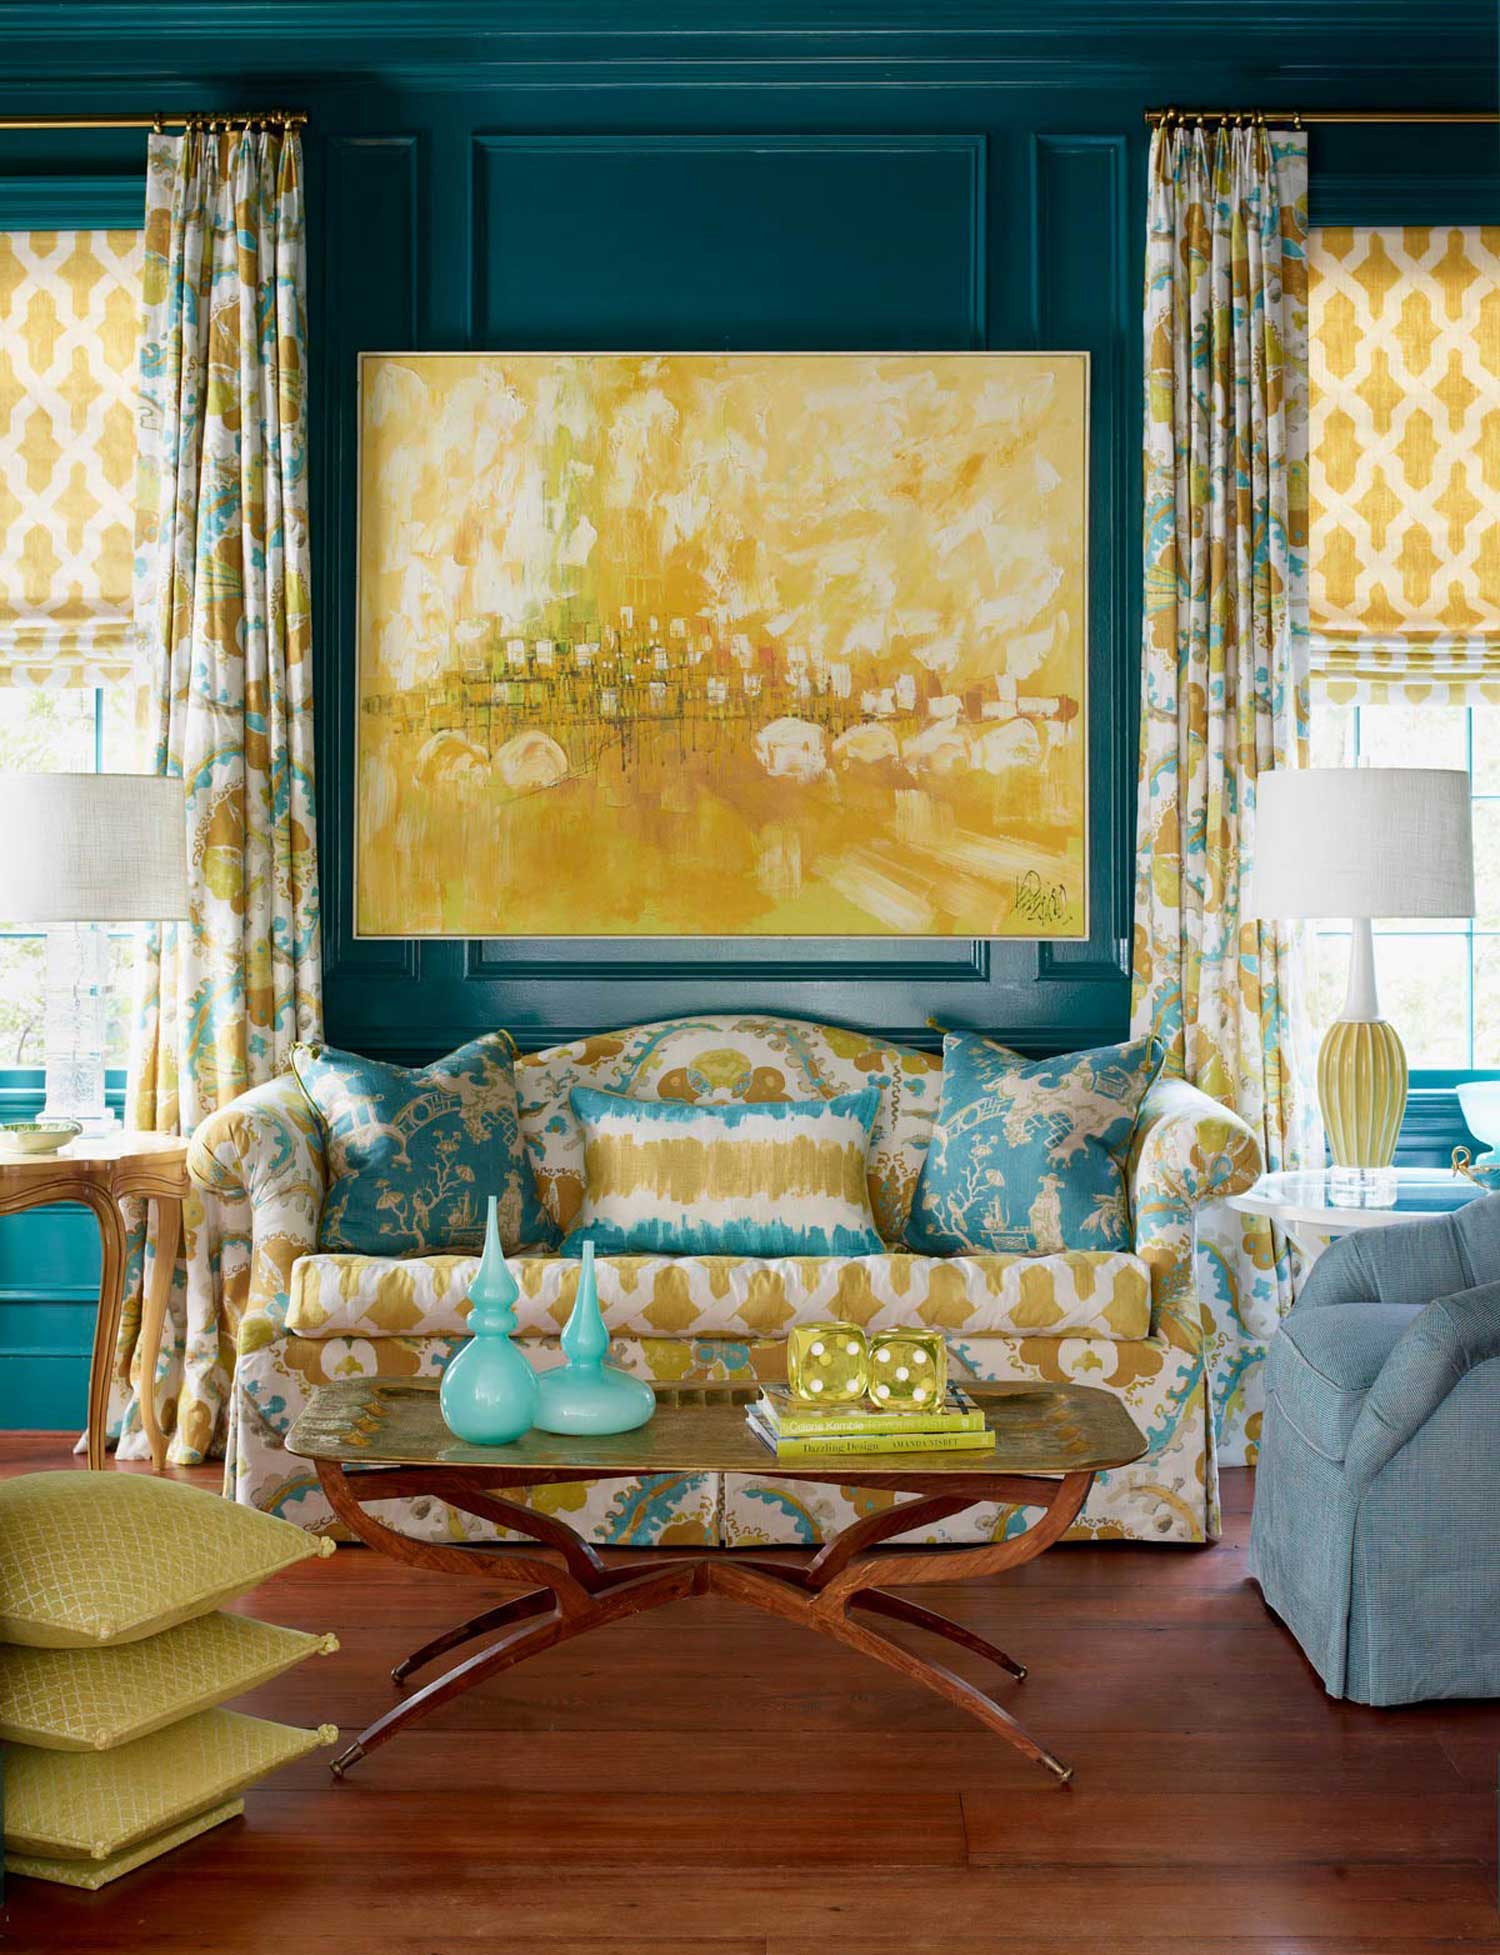 Teal and Yellow Living Room